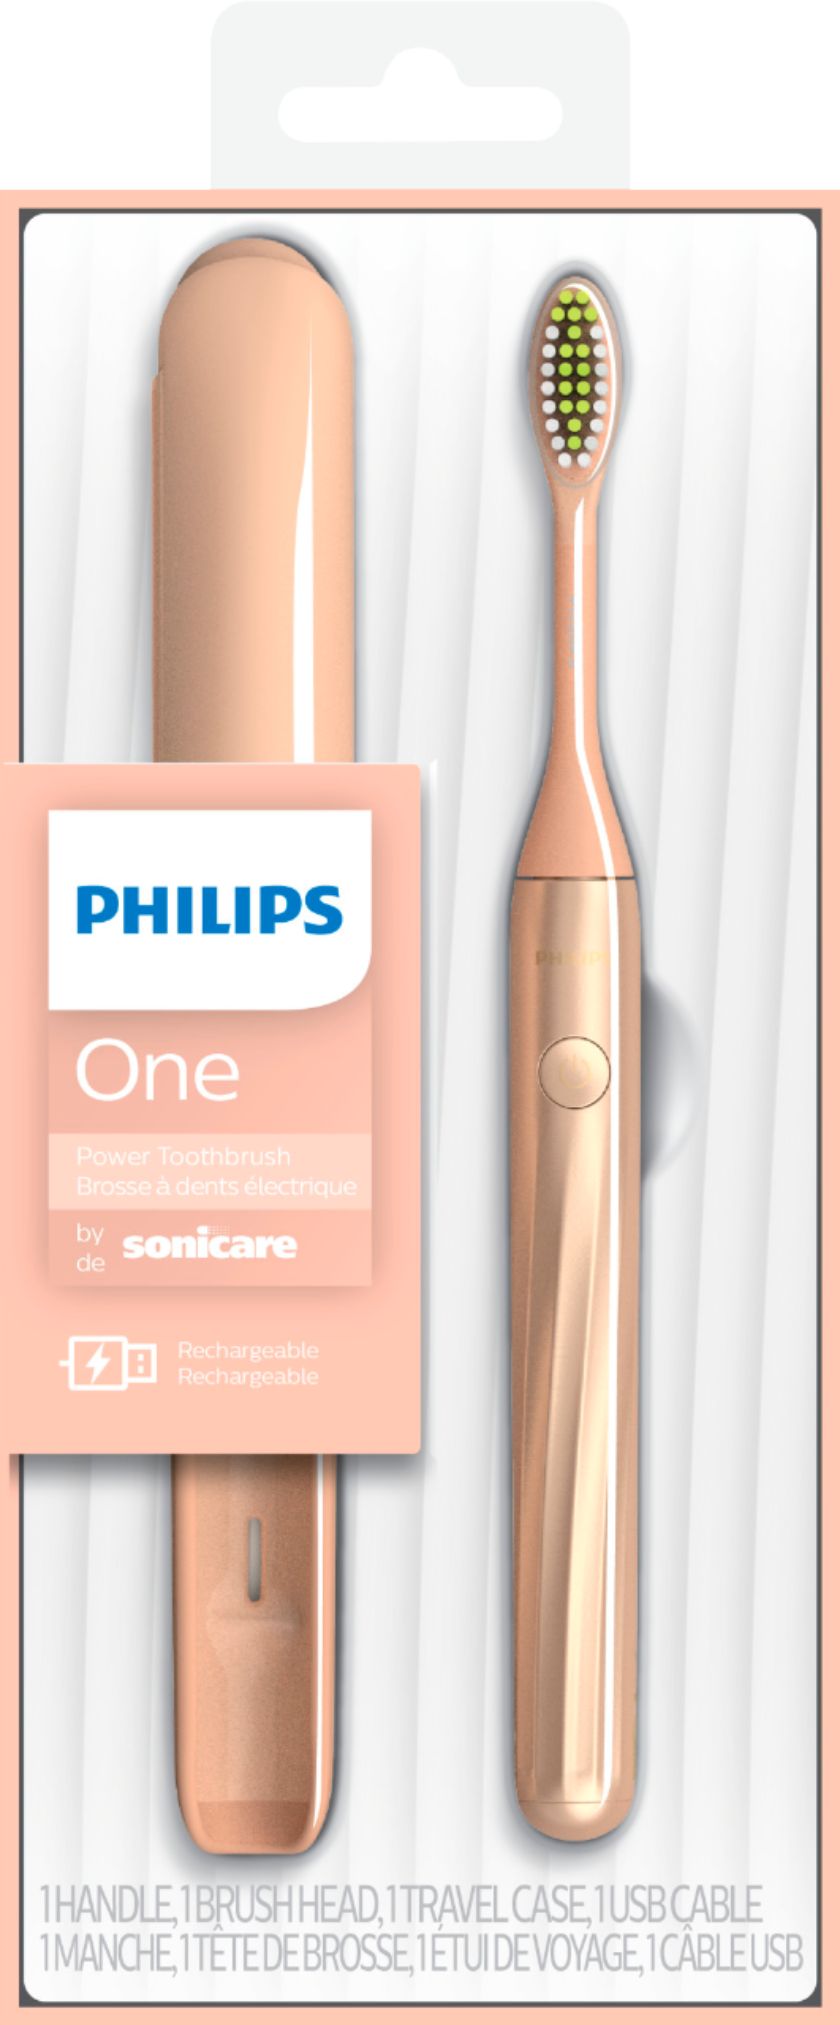 Philips Sonicare - Philips One by Sonicare Rechargeable Toothbrush - Shimmer